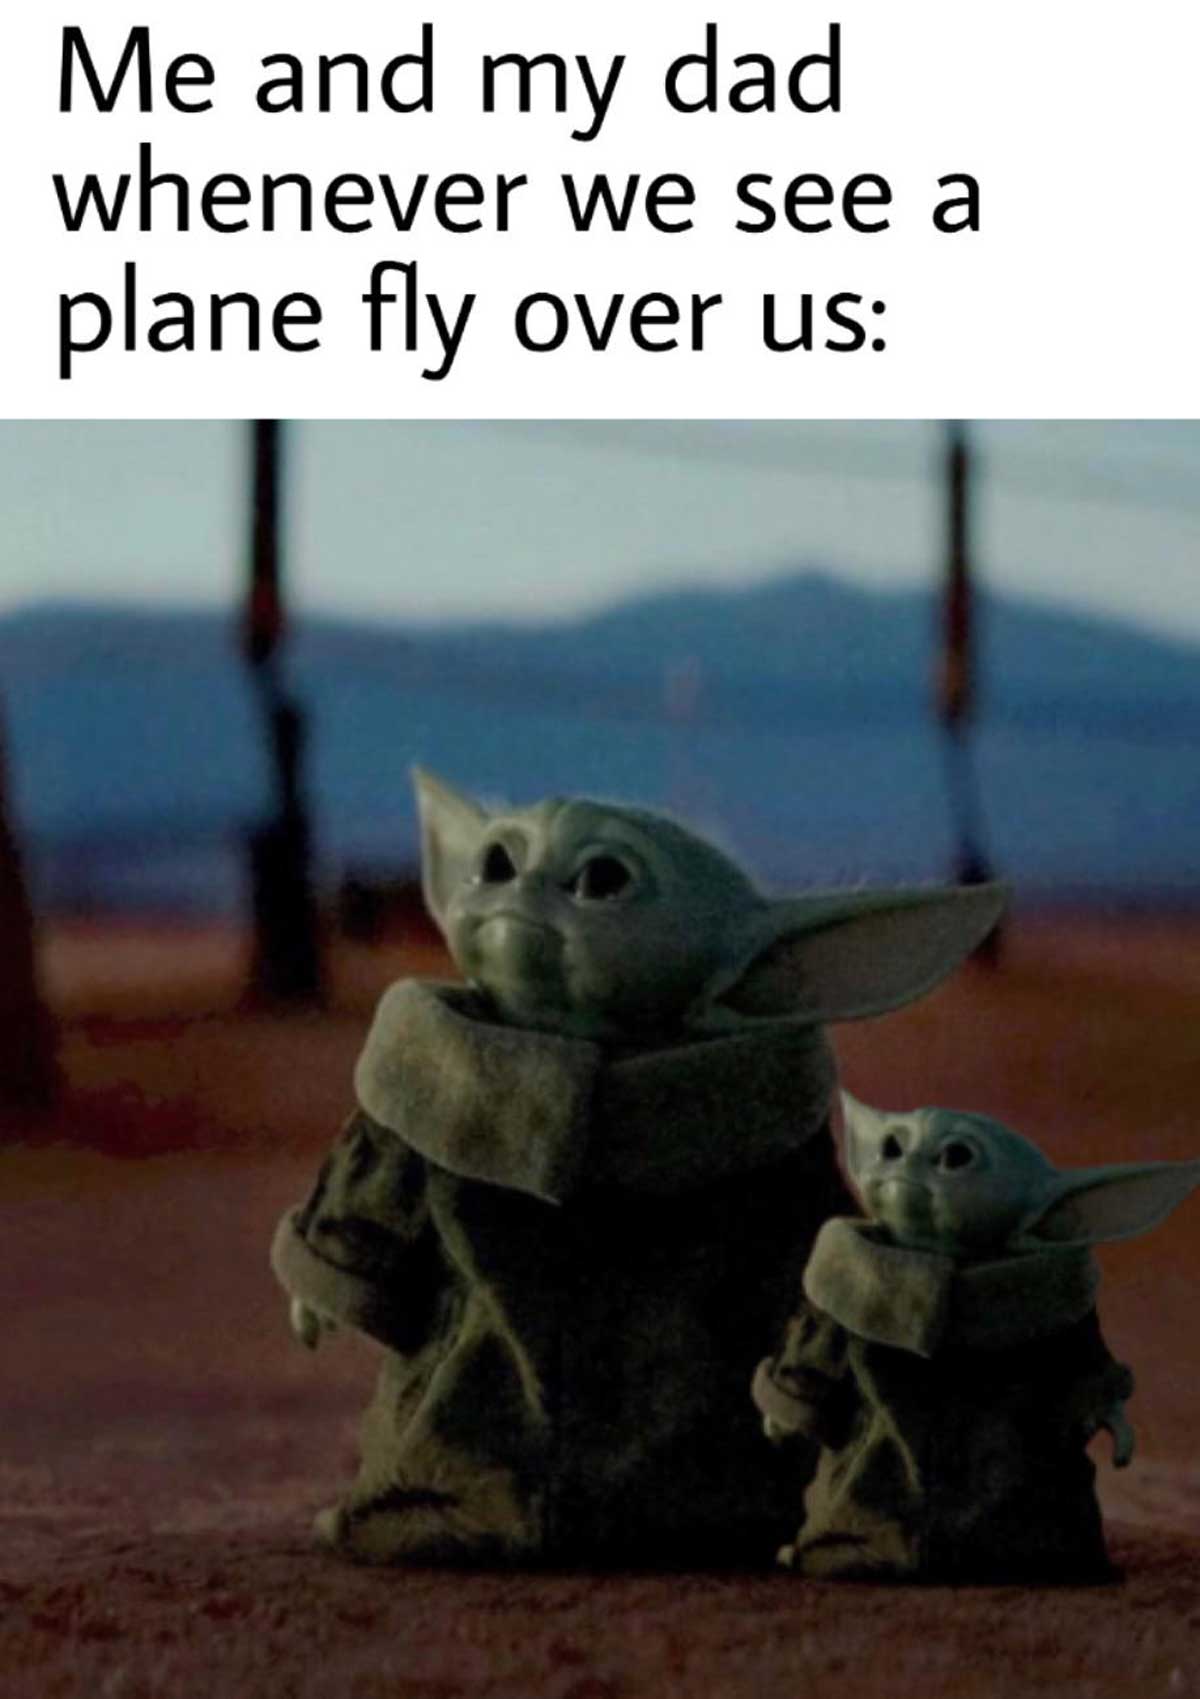 photo caption - Me and my dad whenever we see a plane fly over us